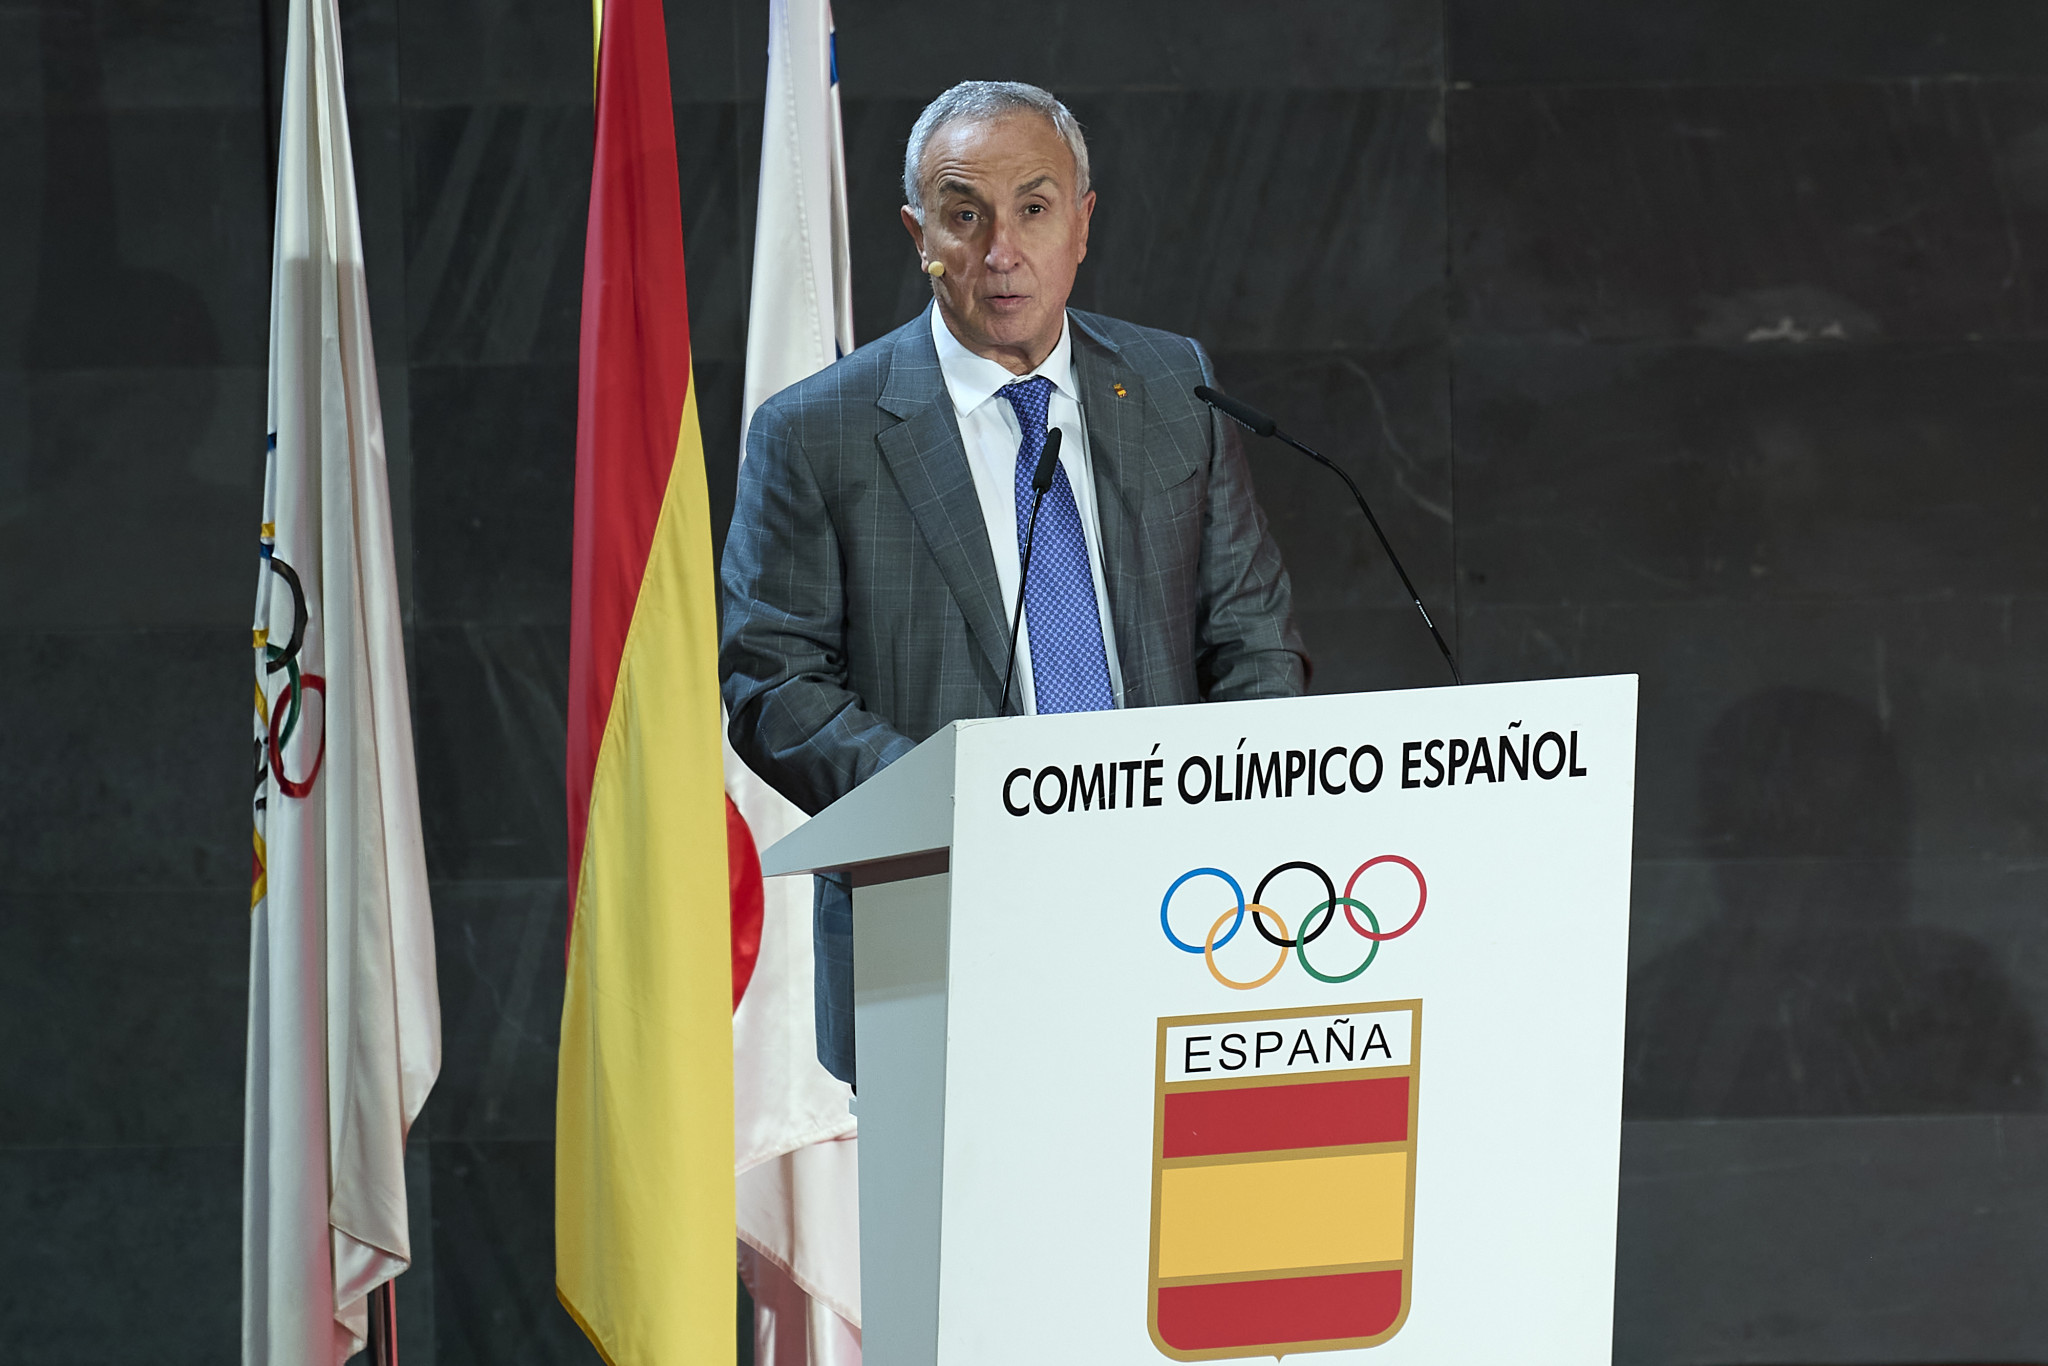 COE President Alejandro Blanco claimed that the Pyrenees-Barcelona bid had not lost ground in the race to stage the 2030 Winter Olympics ©Getty Images